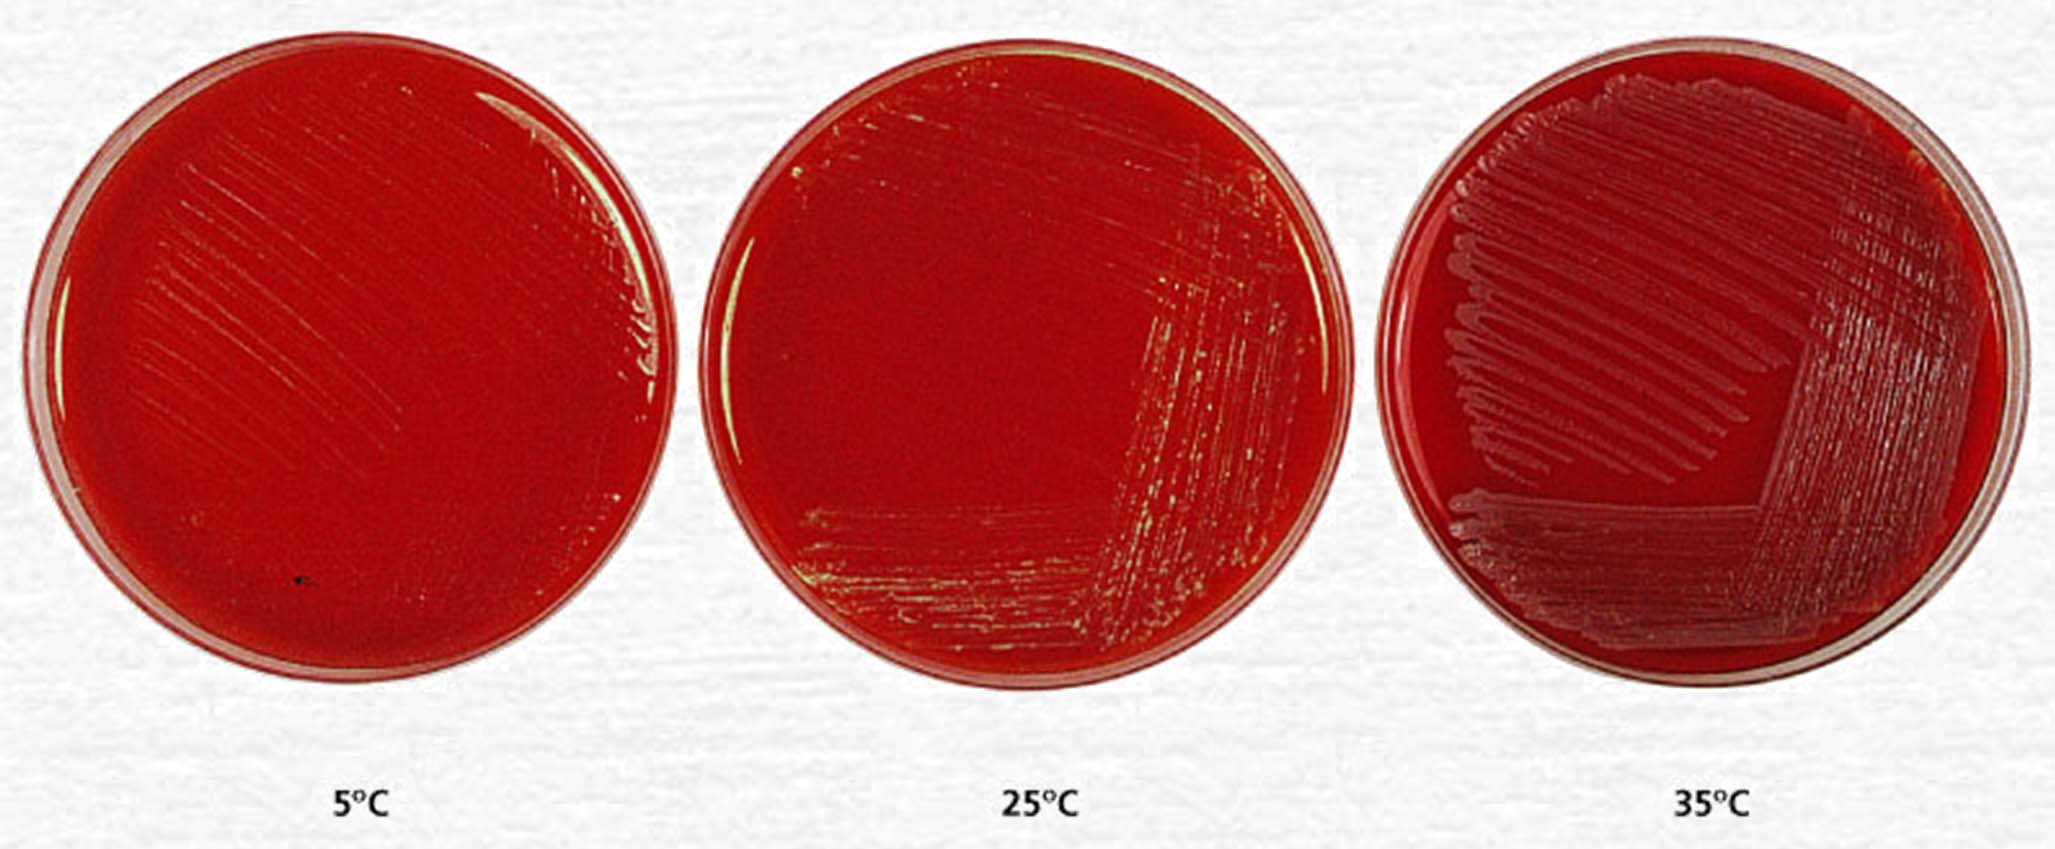 Effects of Temperature on Growth Growth of Staphylococcus aureus